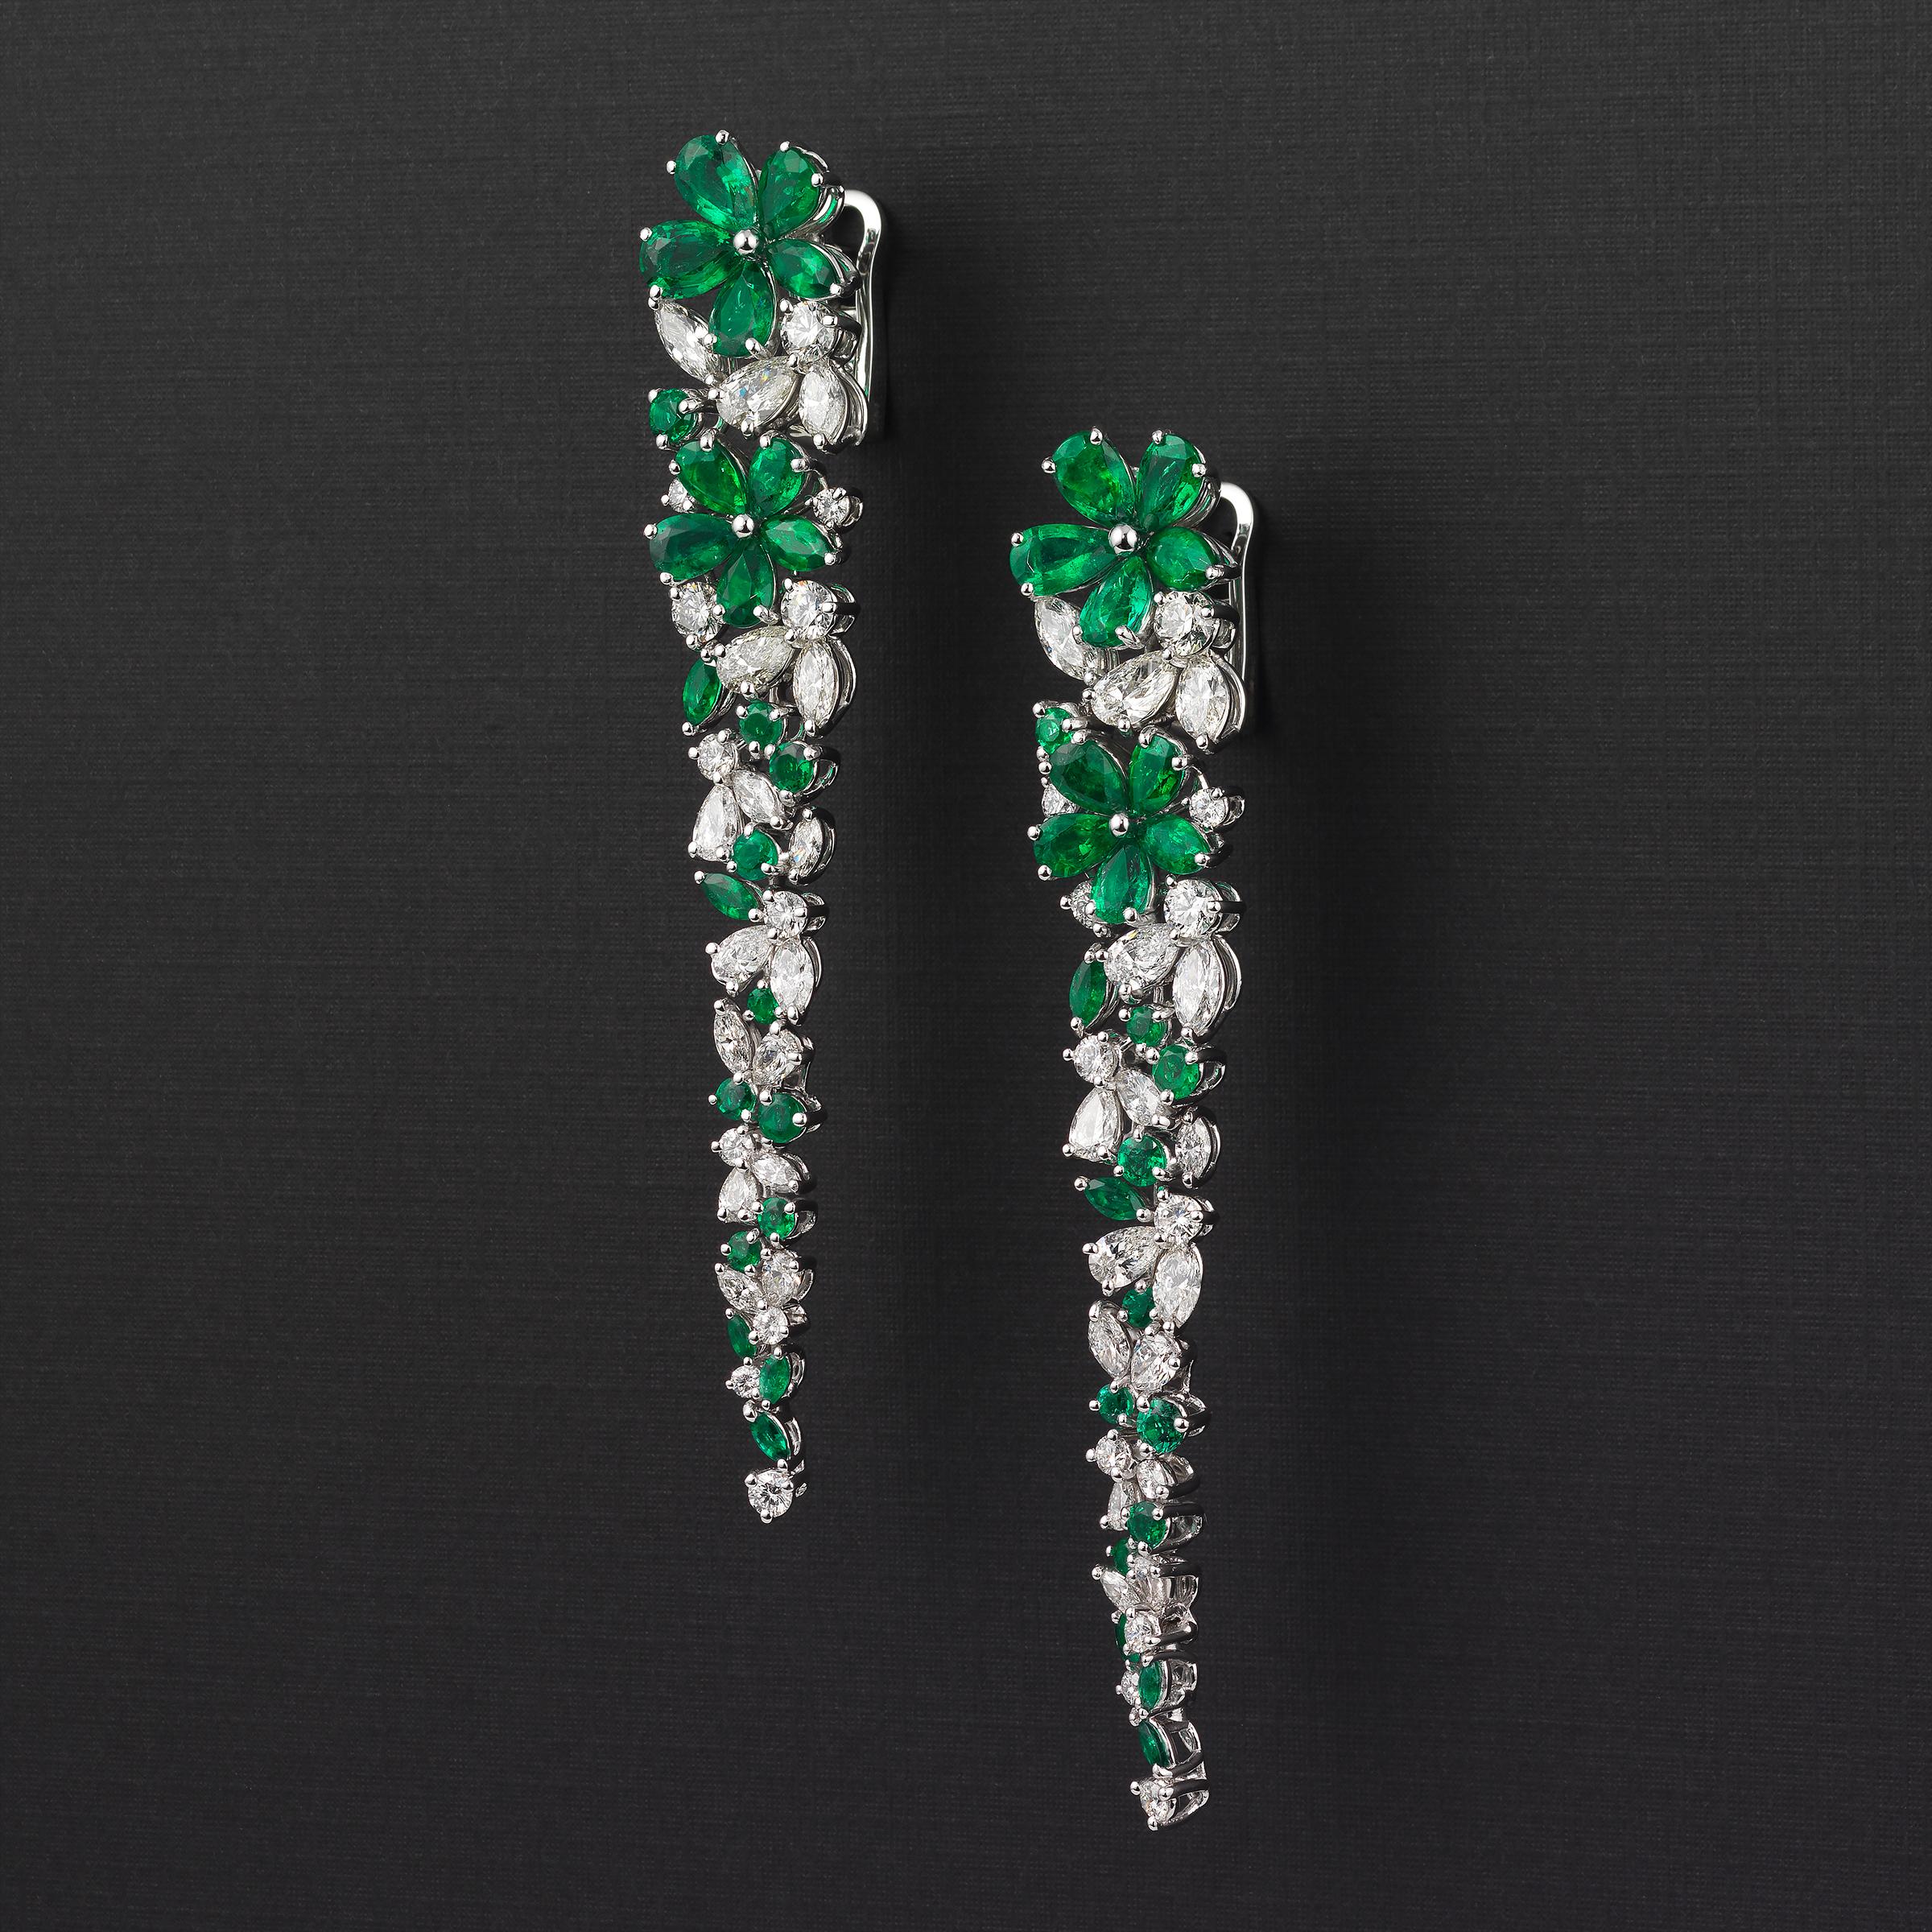 Exceptional Graff dangle earrings of floral inspiration radiating red-carpet glamour and exquisite elegance and showcasing approximately 9 carats of glittering fine white diamonds and 12 carats of vivid green emeralds, all flawlessly set in 18 karat